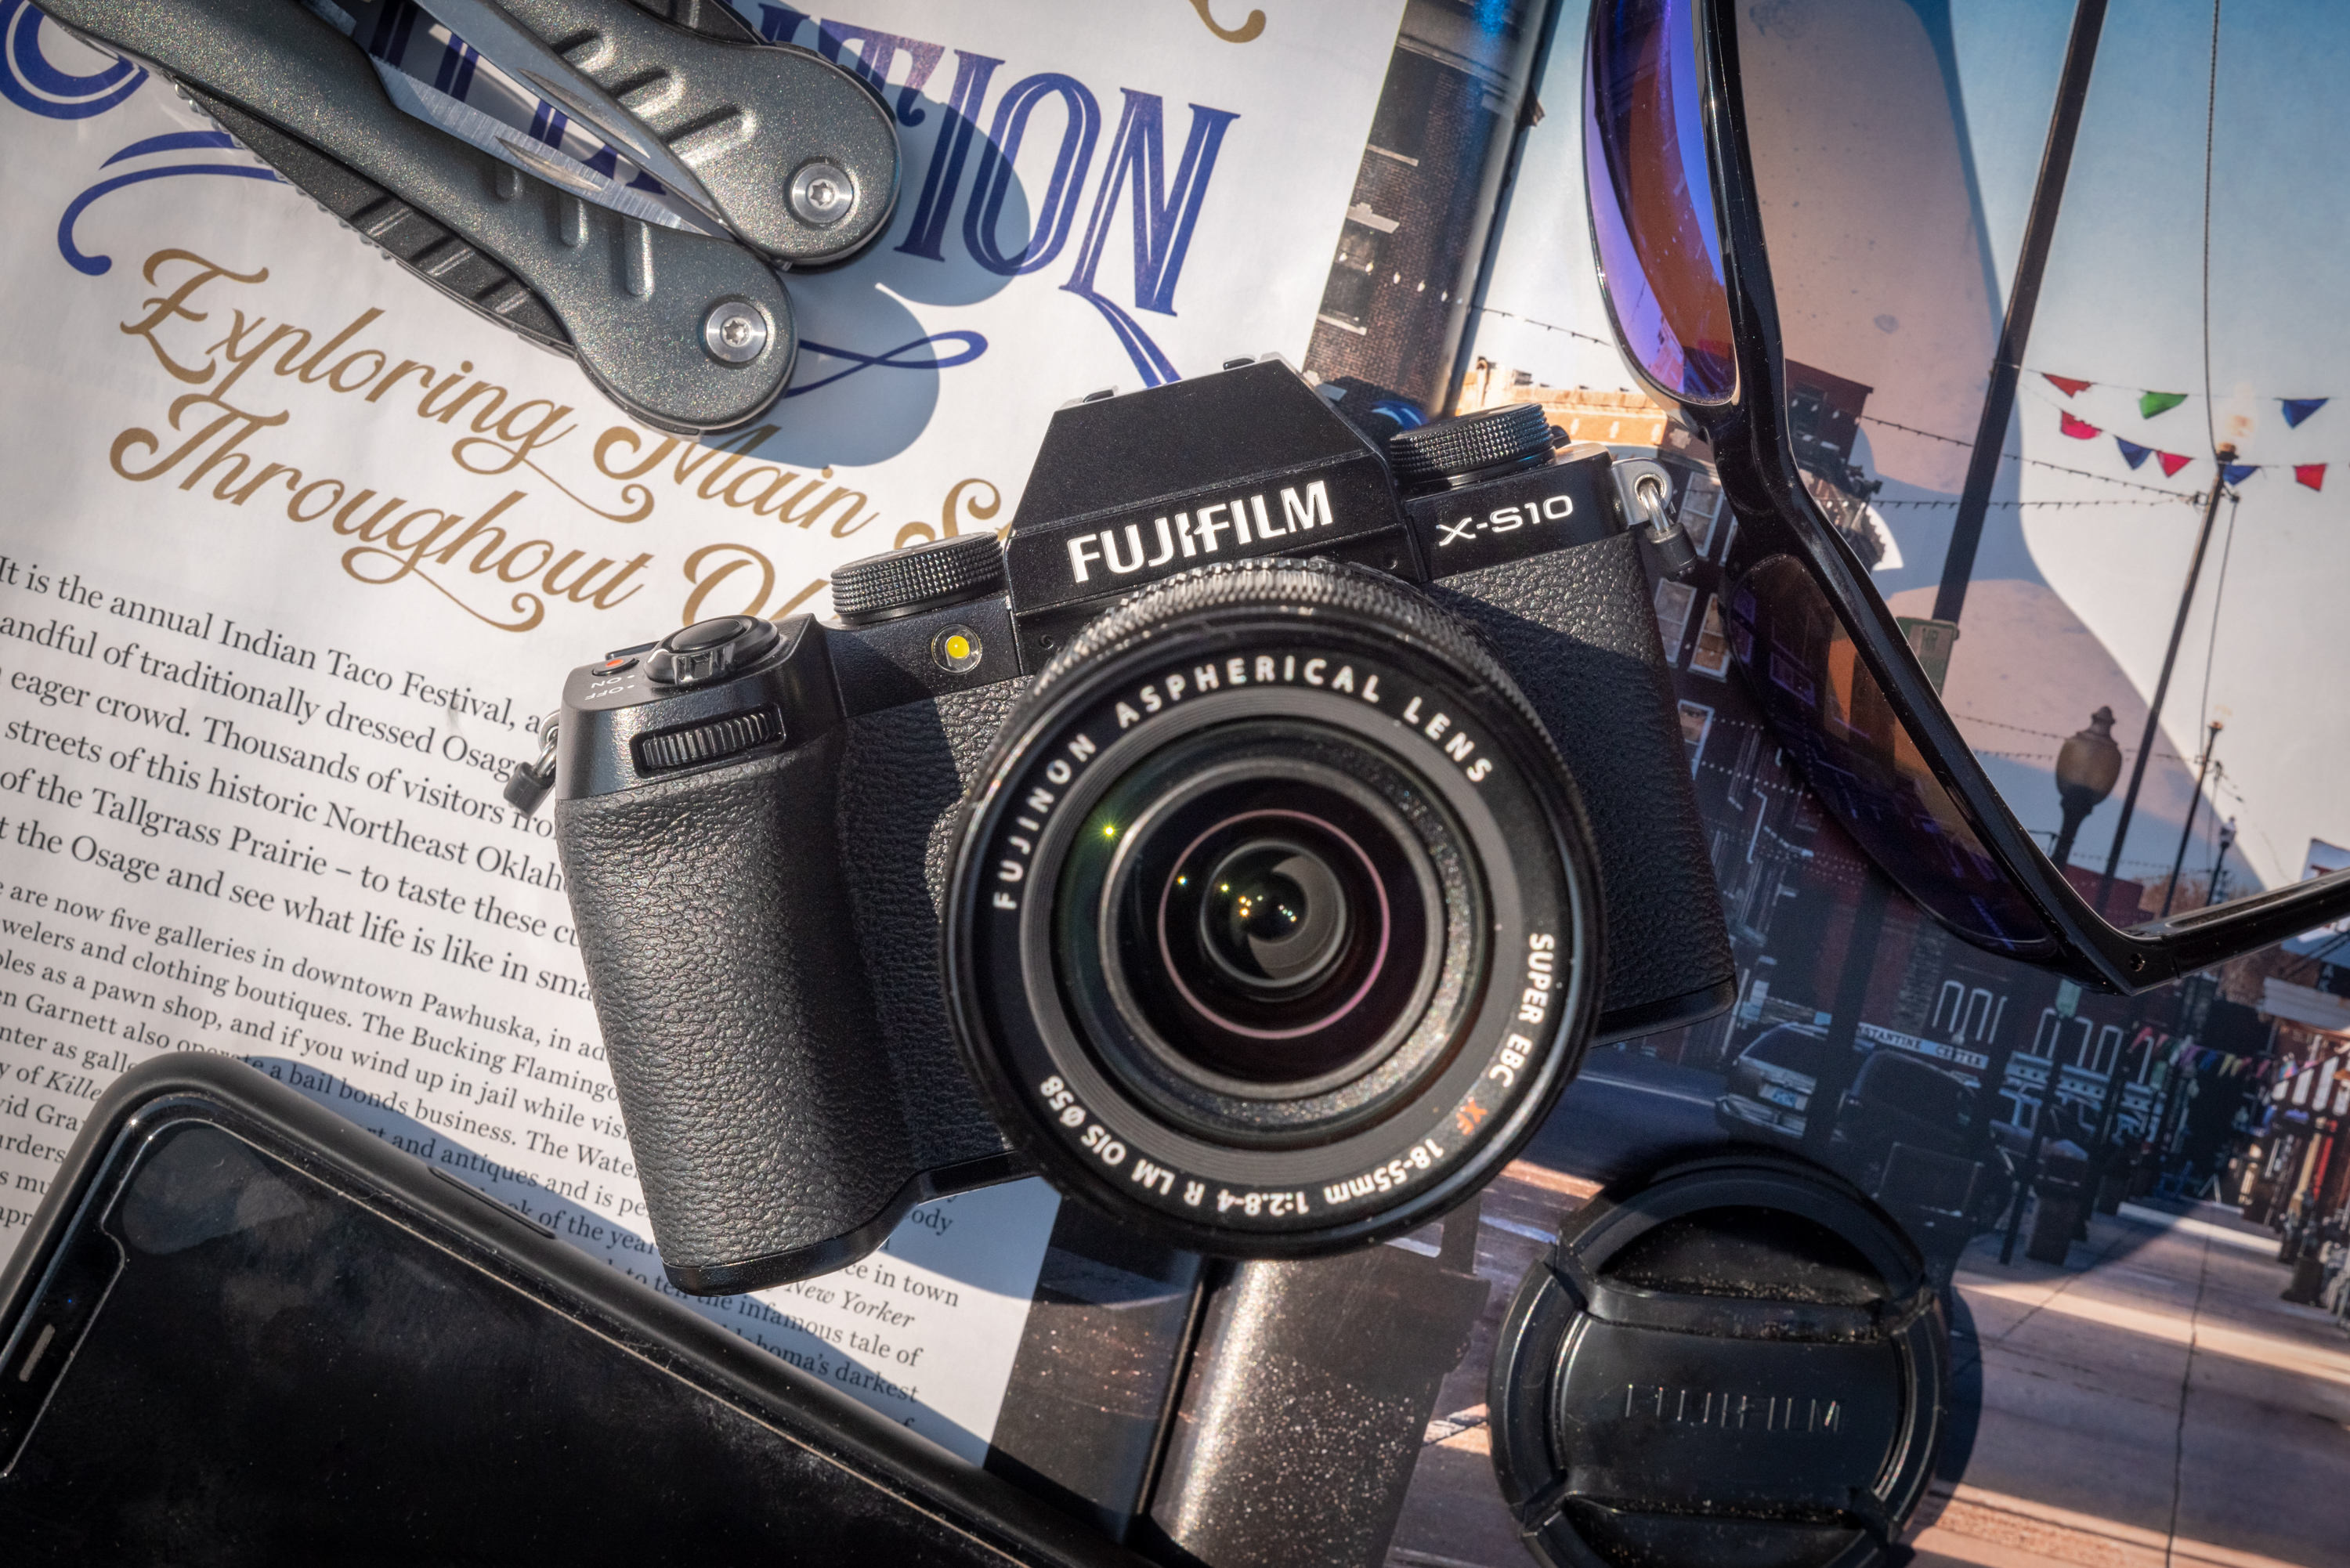 Get the Latest and Greatest Fujifilm Gear at a Lower Price